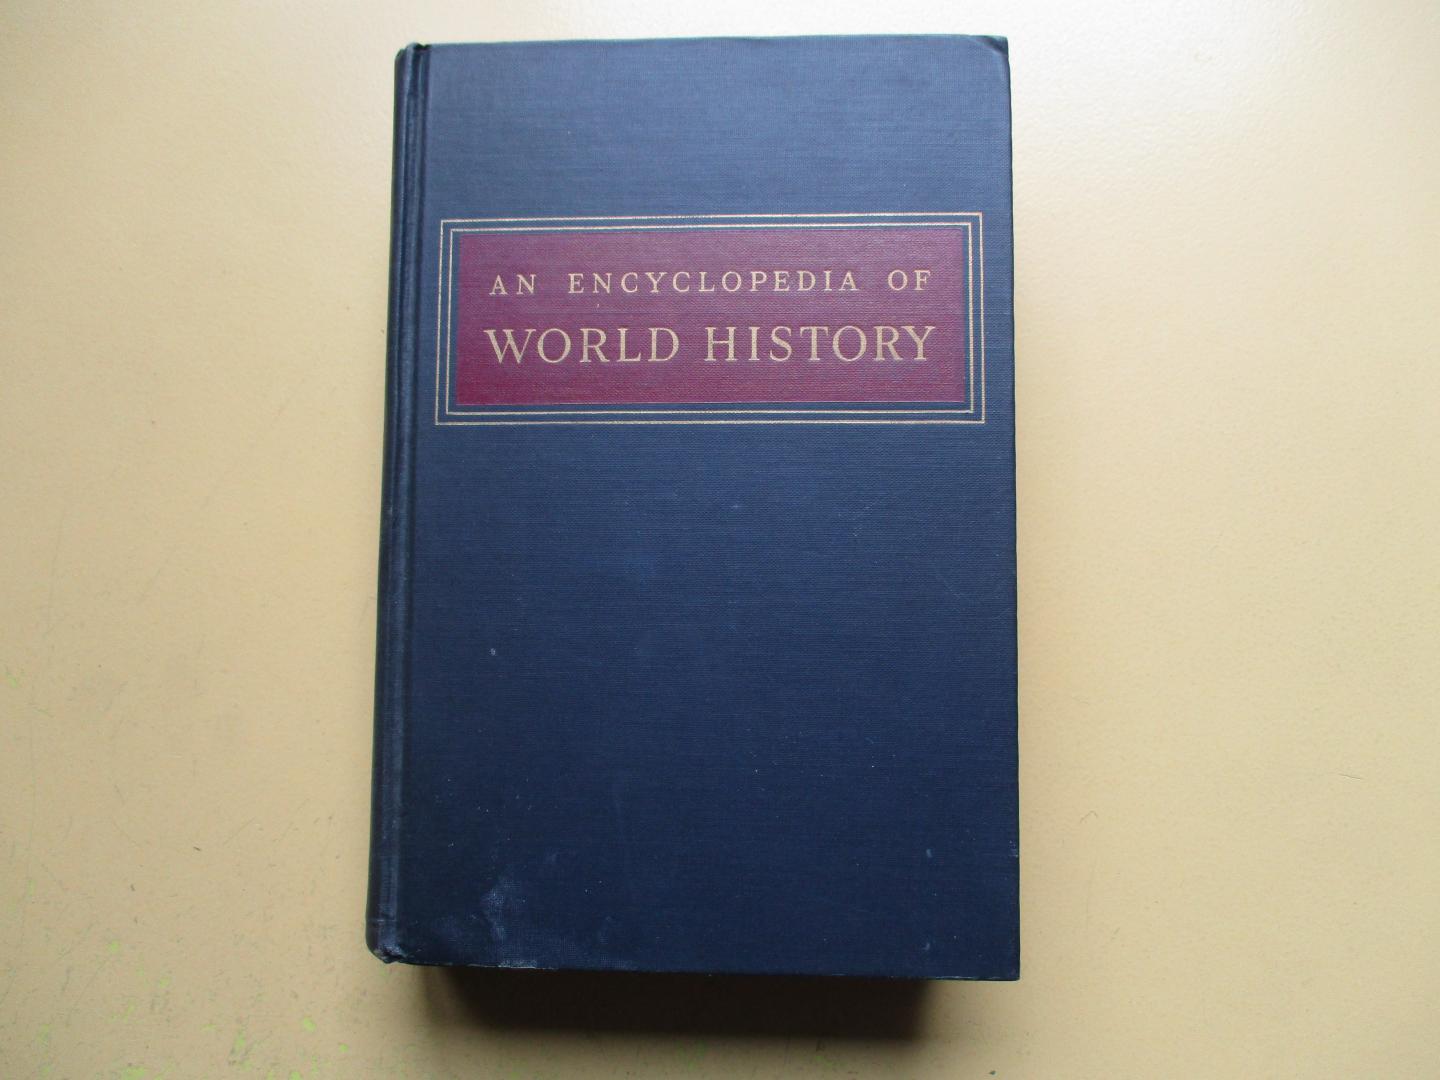 Langer, William L. - An Encyclopedia of World History - Ancient, Medieval and Modern - Chronologically arranged